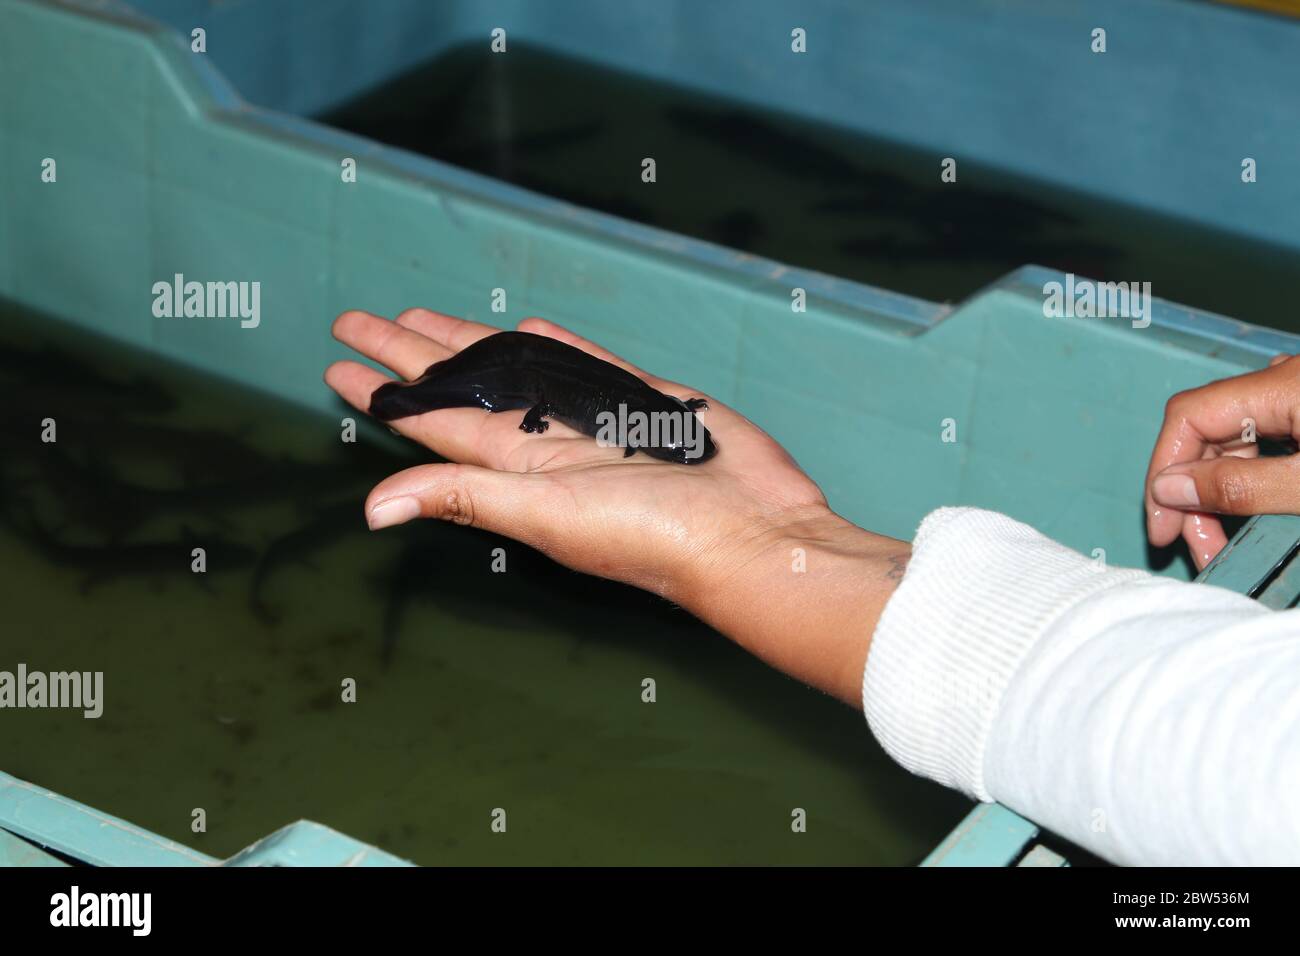 A hand holding Axolotl in the district of Xochimilco in Mexico city. Ambystoma mexicanum. Stock Photo